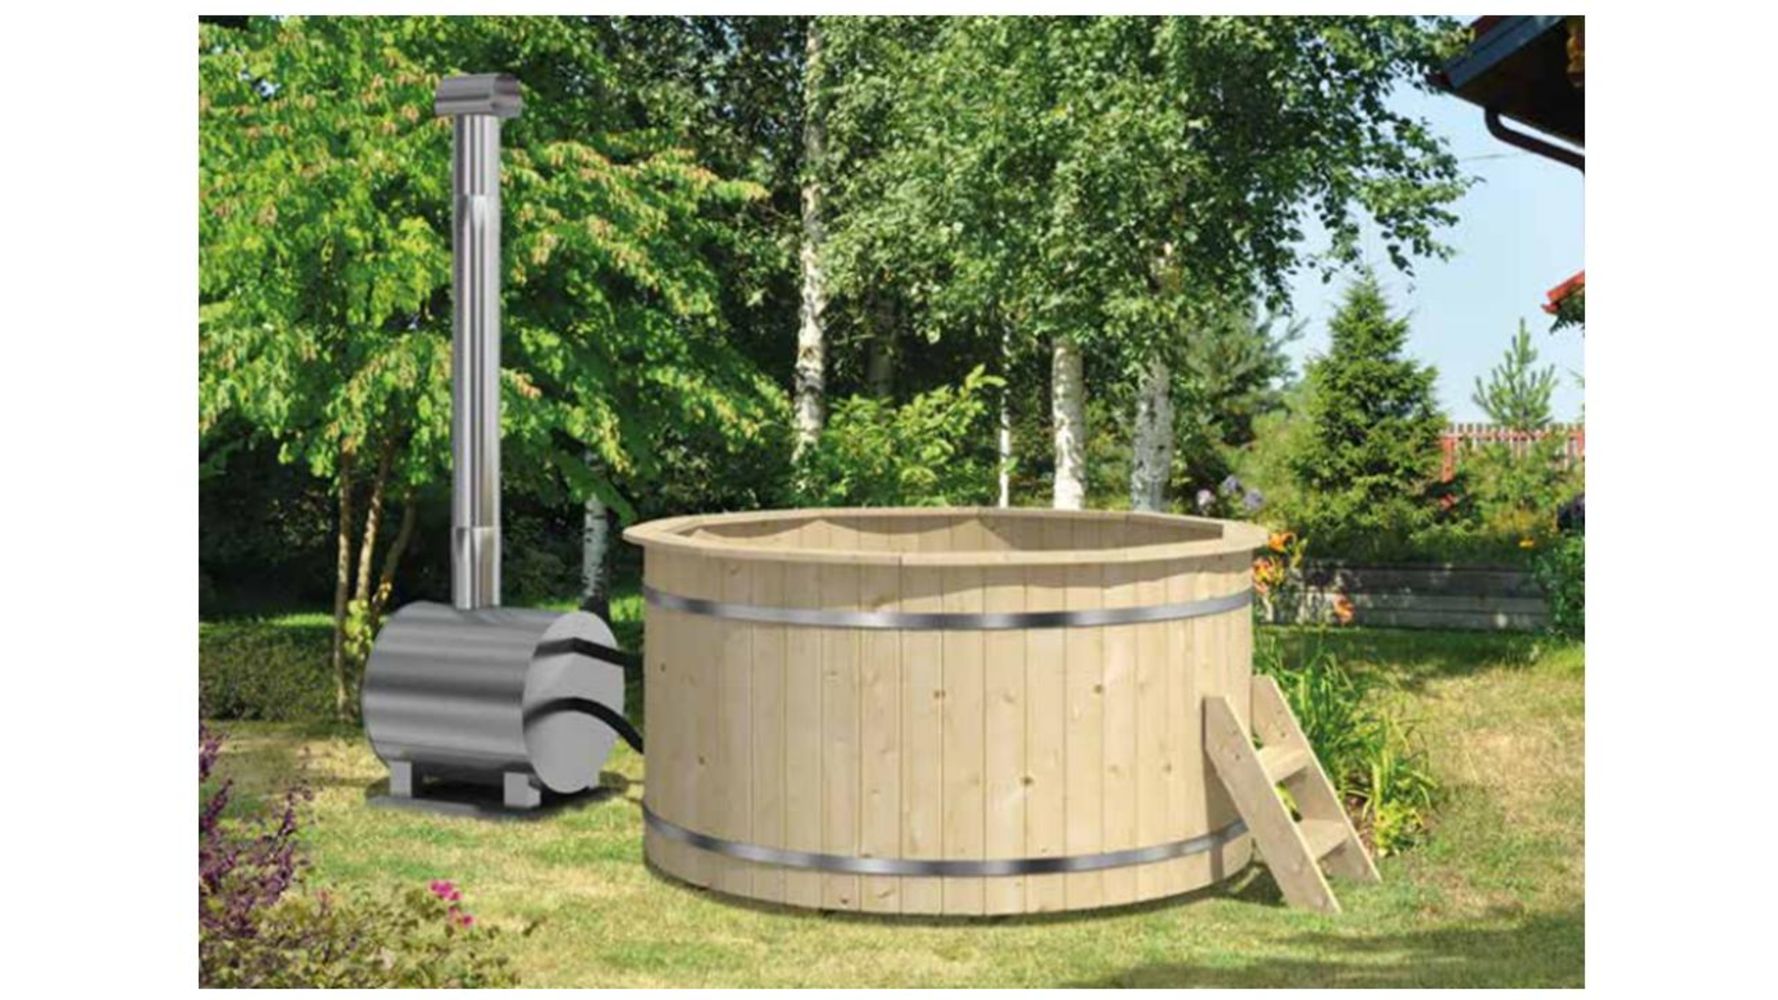 *FREE DELIVERY* Brand New Luxury 1.9m Hot Tubs - Fantastic Quality Spruce Construction - Wood Fired Heaters